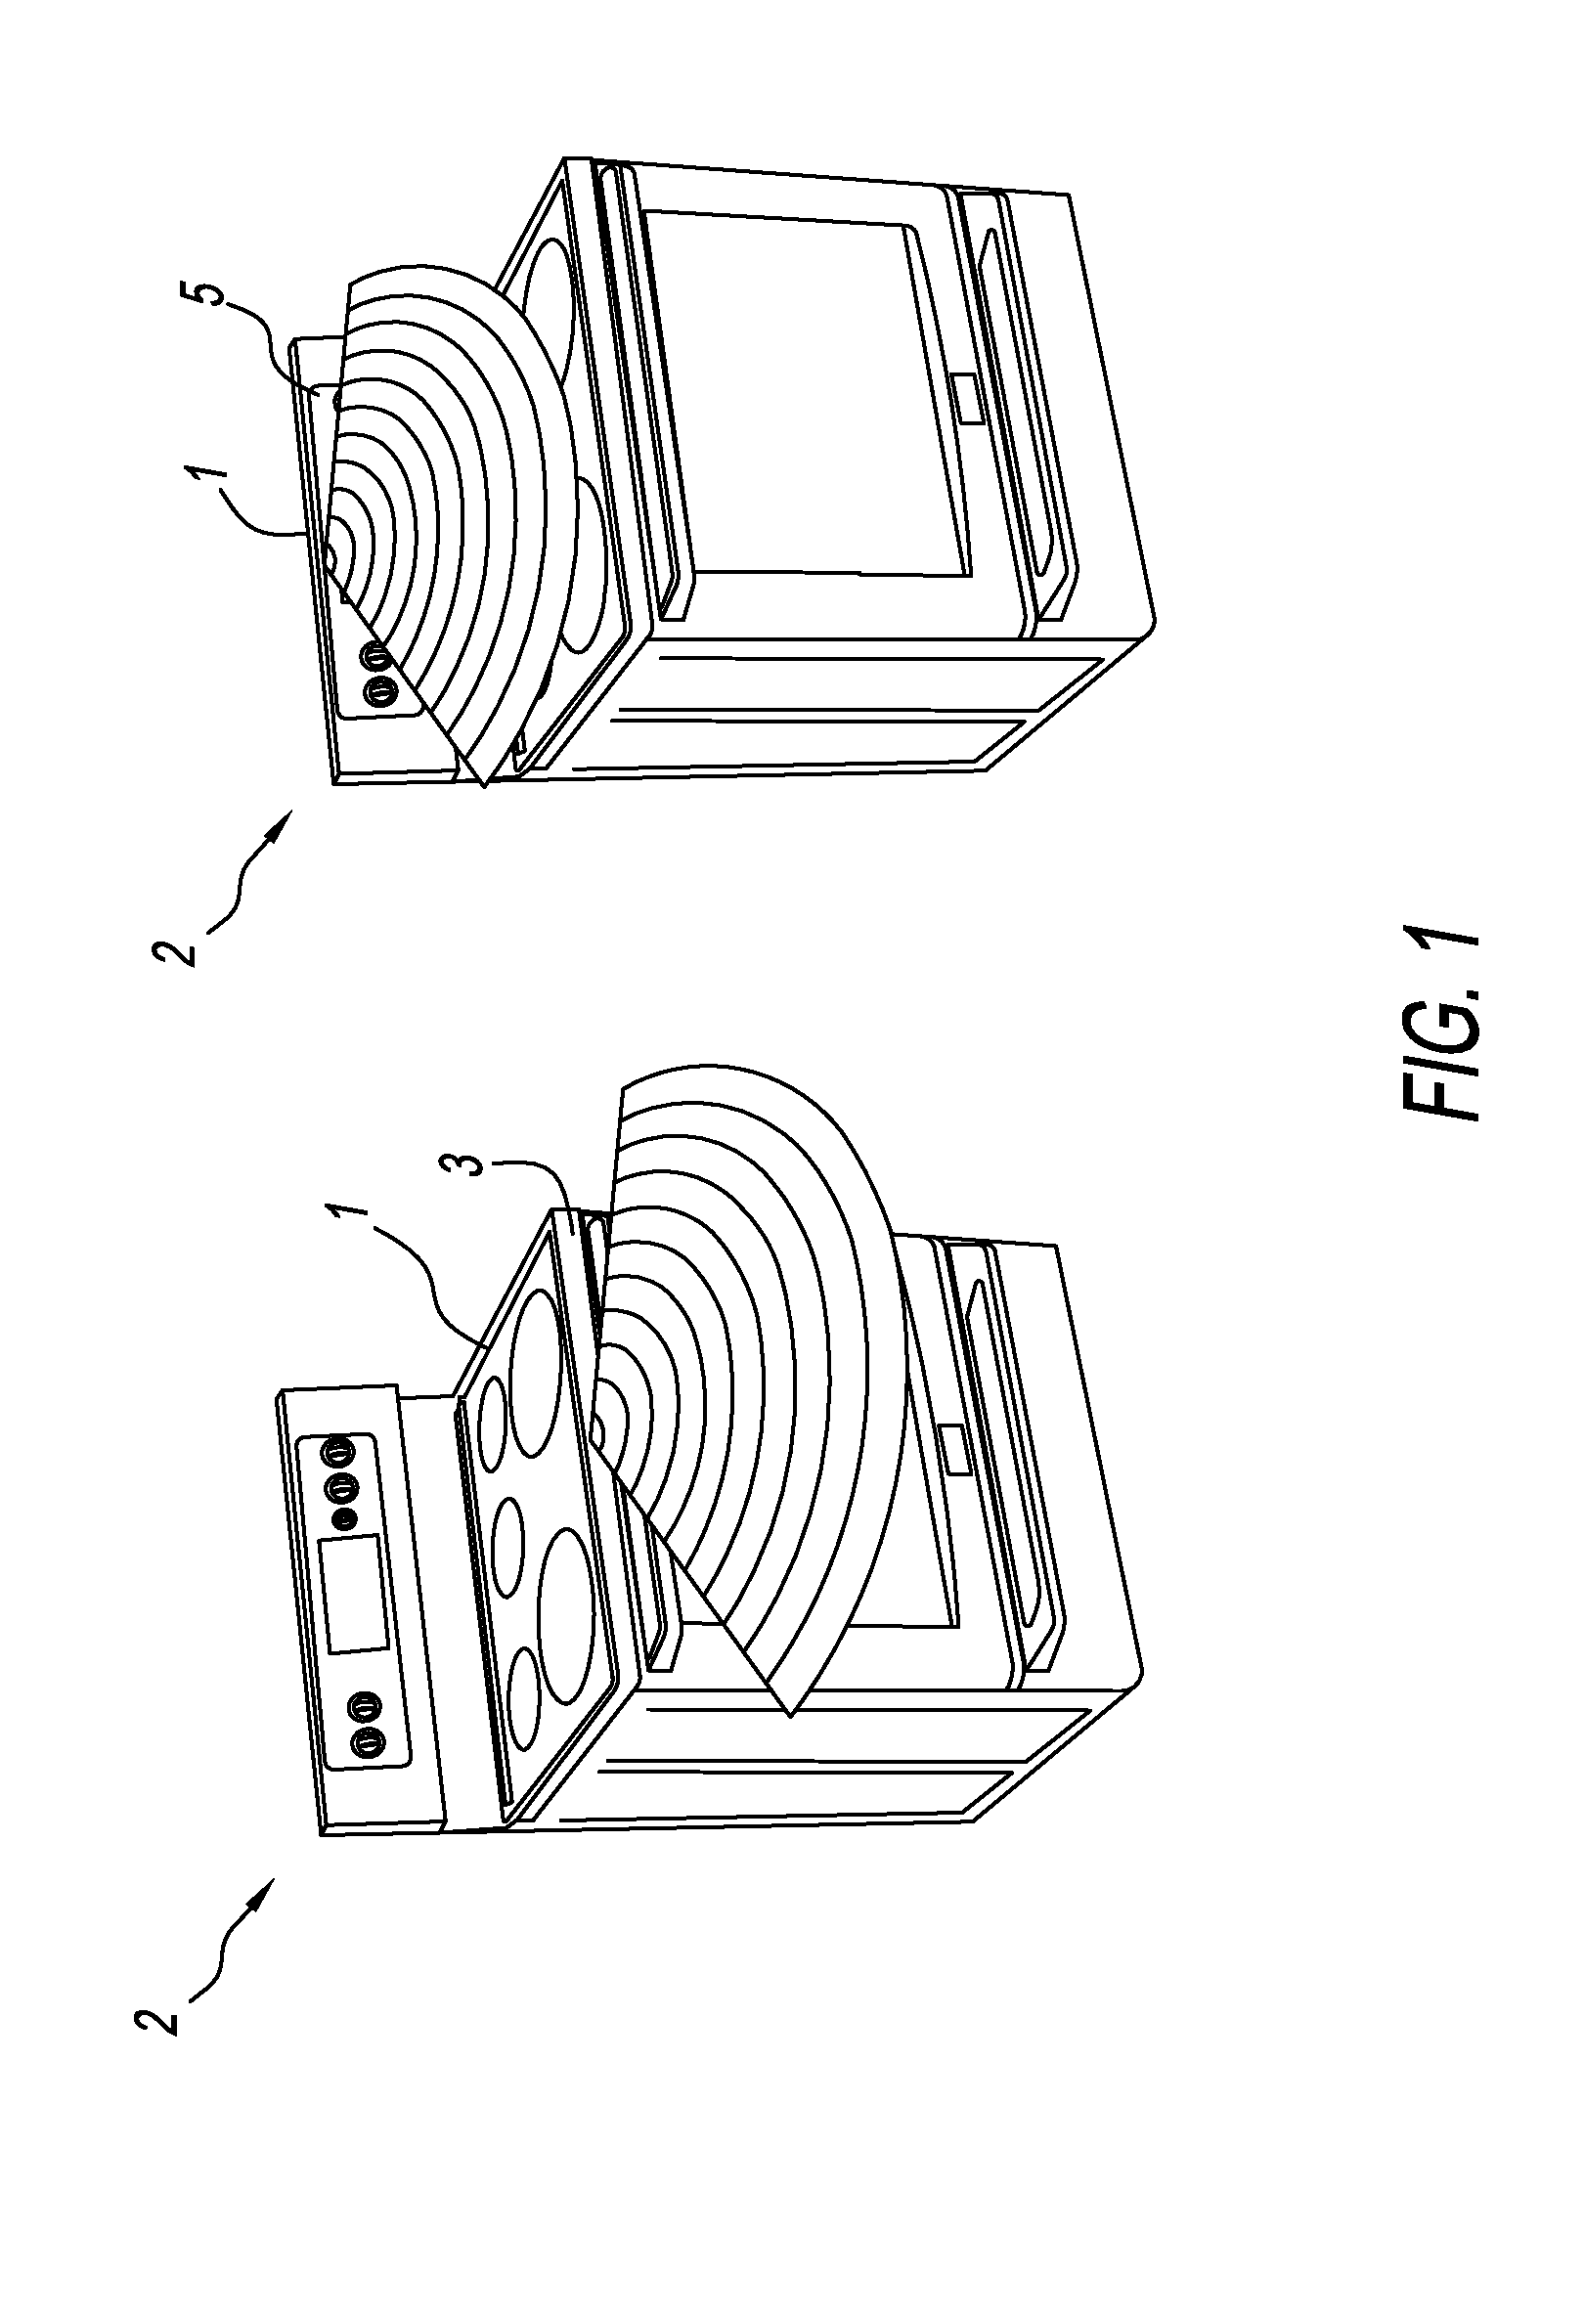 Appliance monitoring system and method with connectivity and communication protocols